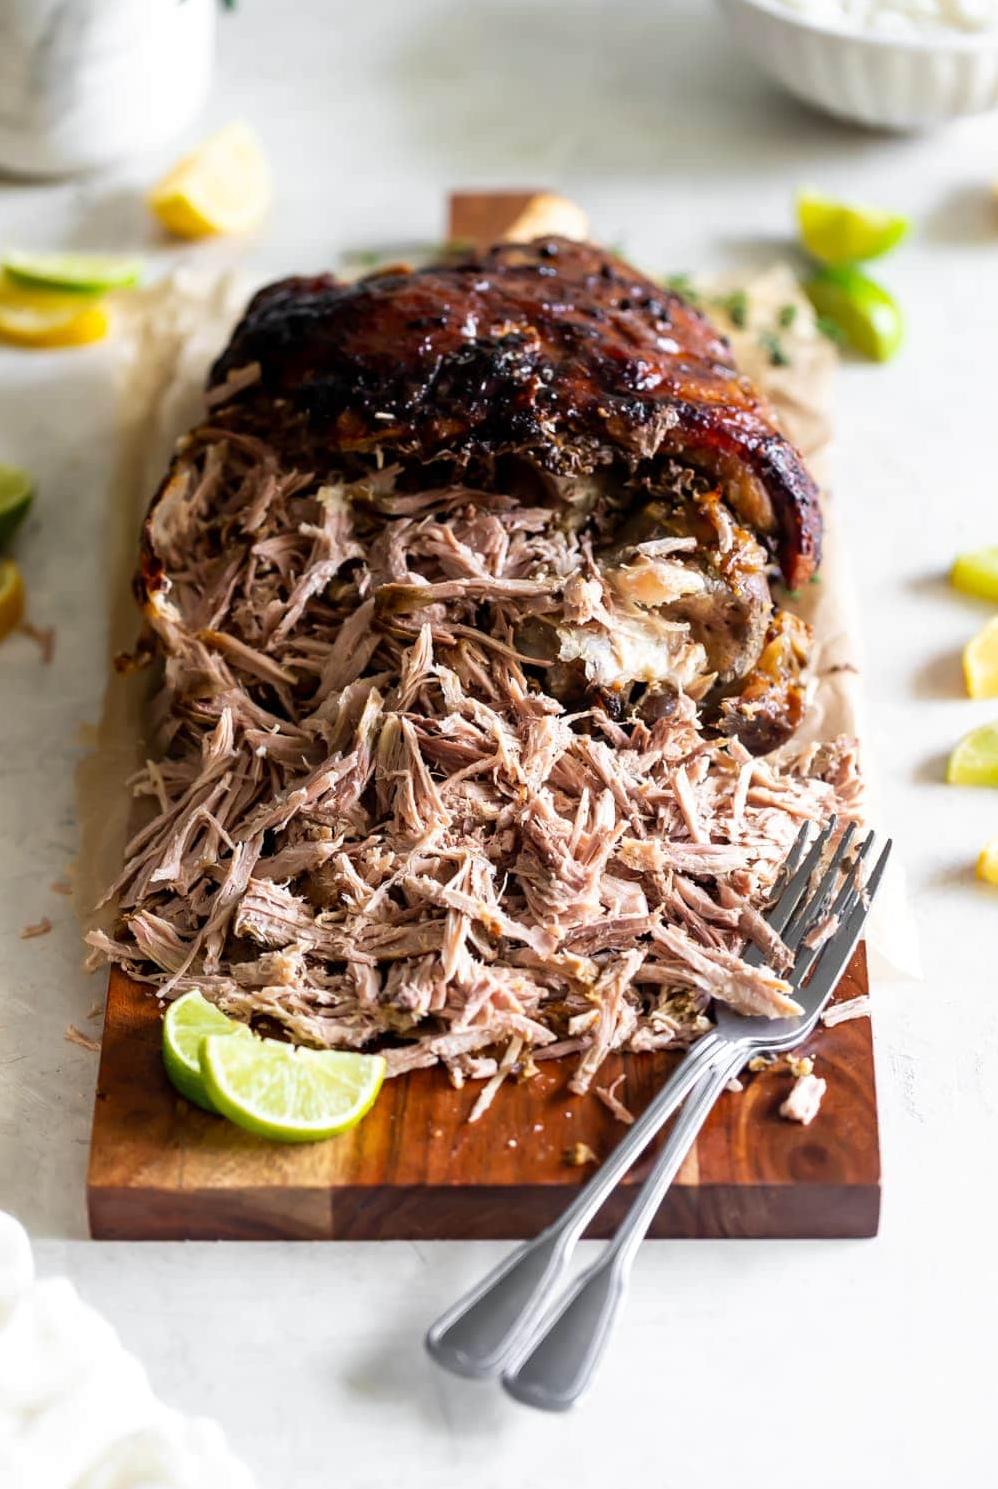  Roasted to perfection, this Cuban pork can be enjoyed for dinner, lunch, or a party.